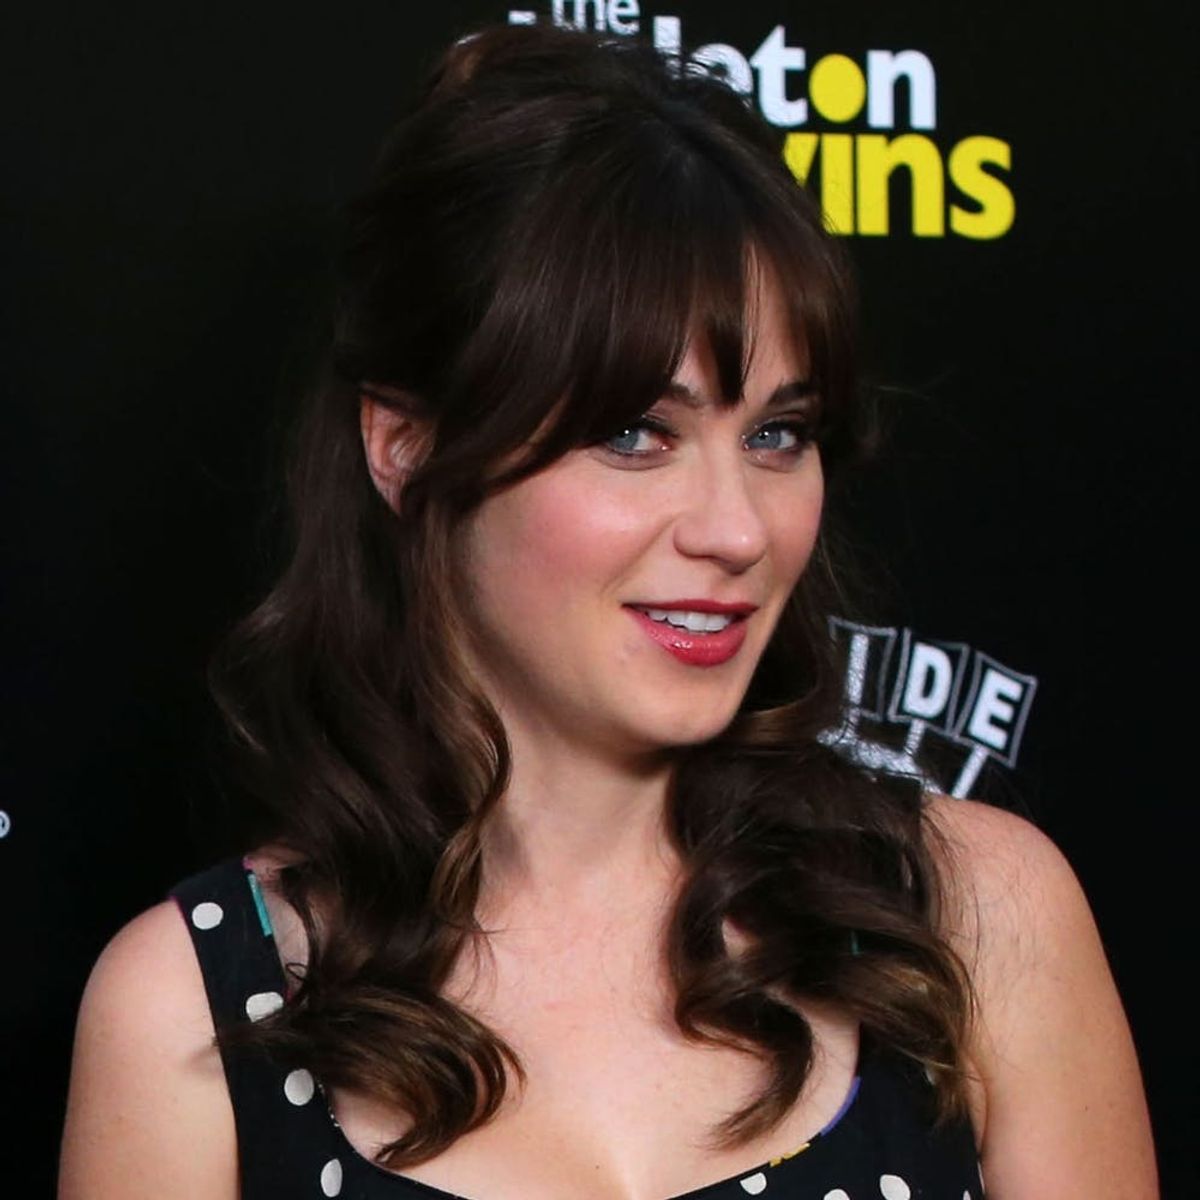 Zooey Deschanel Will Play Belle in a Live ‘Beauty and the Beast’ Concert